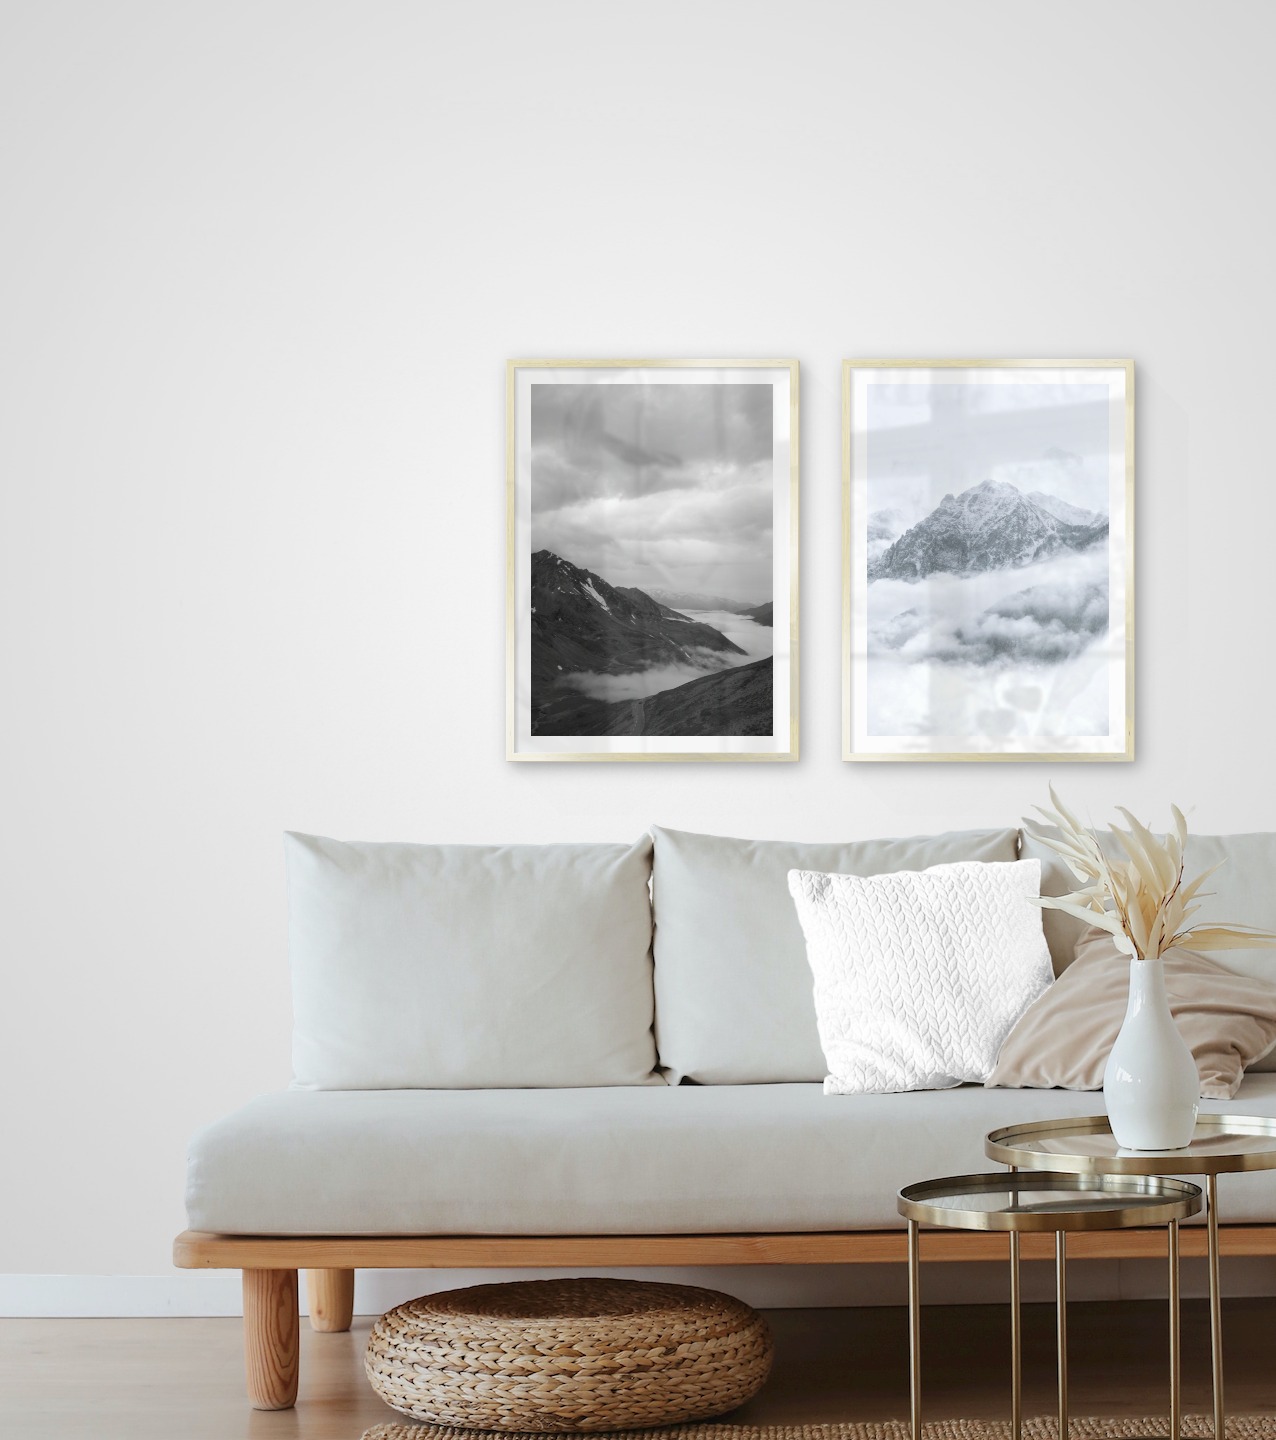 Gallery wall with picture frames in gold in sizes 50x70 with prints "Road among mountains" and "Snowy mountains"